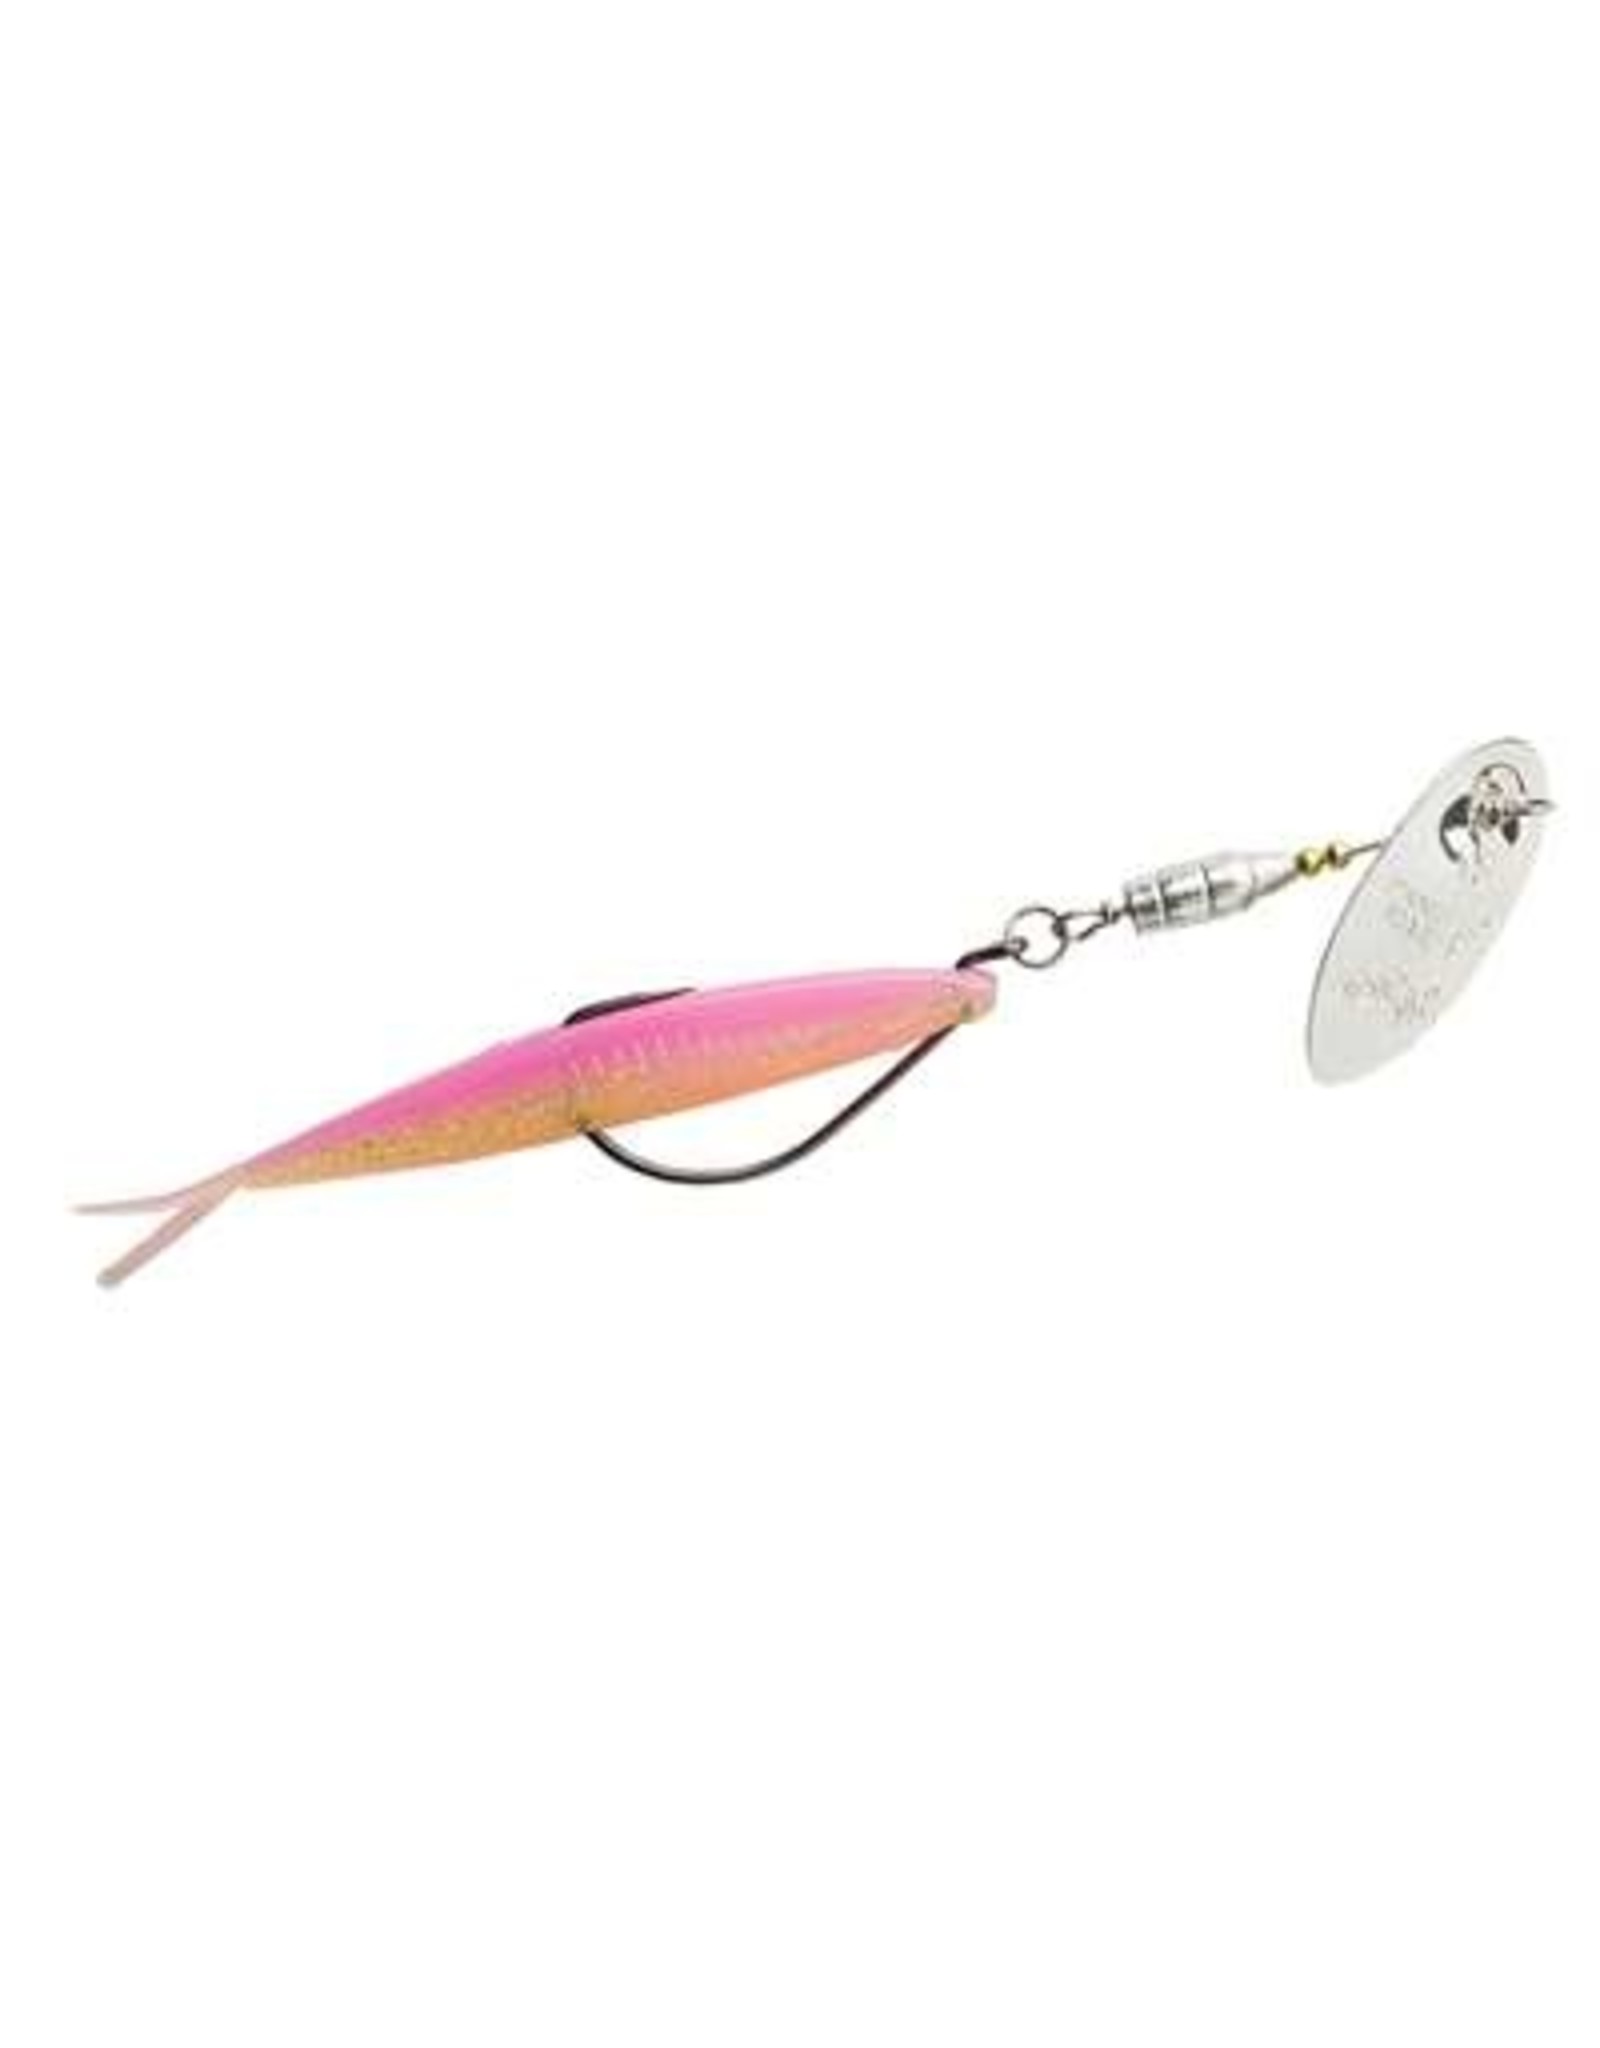 Panther Martin Weed Runner - Silver Blade w/ Pink - 2 Count